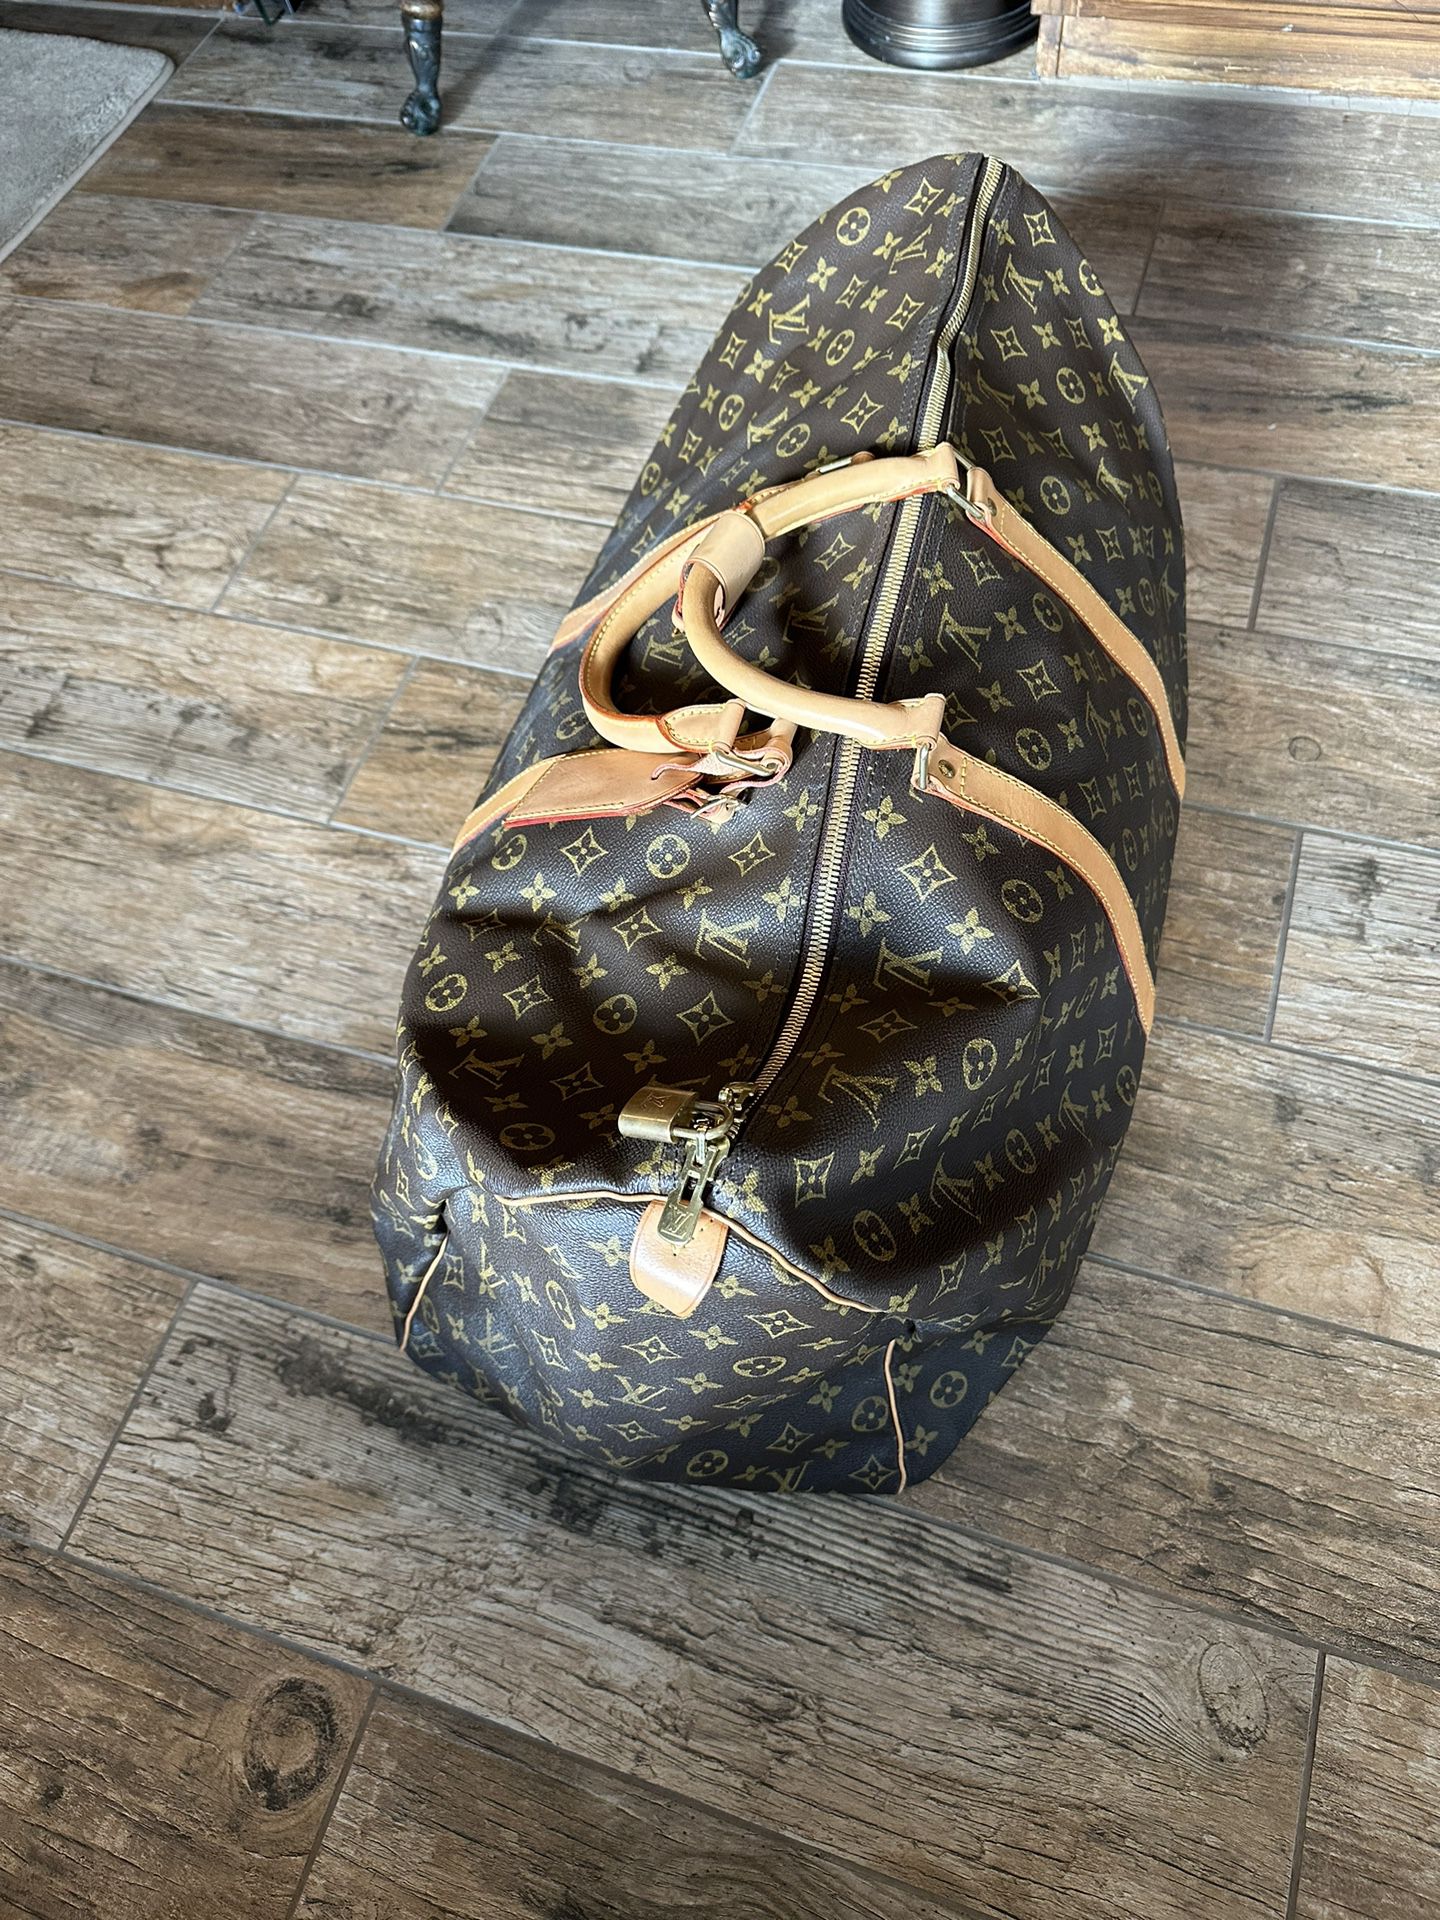 Auth Louis Vuitton Damier Geant Souverain Carryall Boston luggage travel  Bag for Sale in Arlington, TX - OfferUp